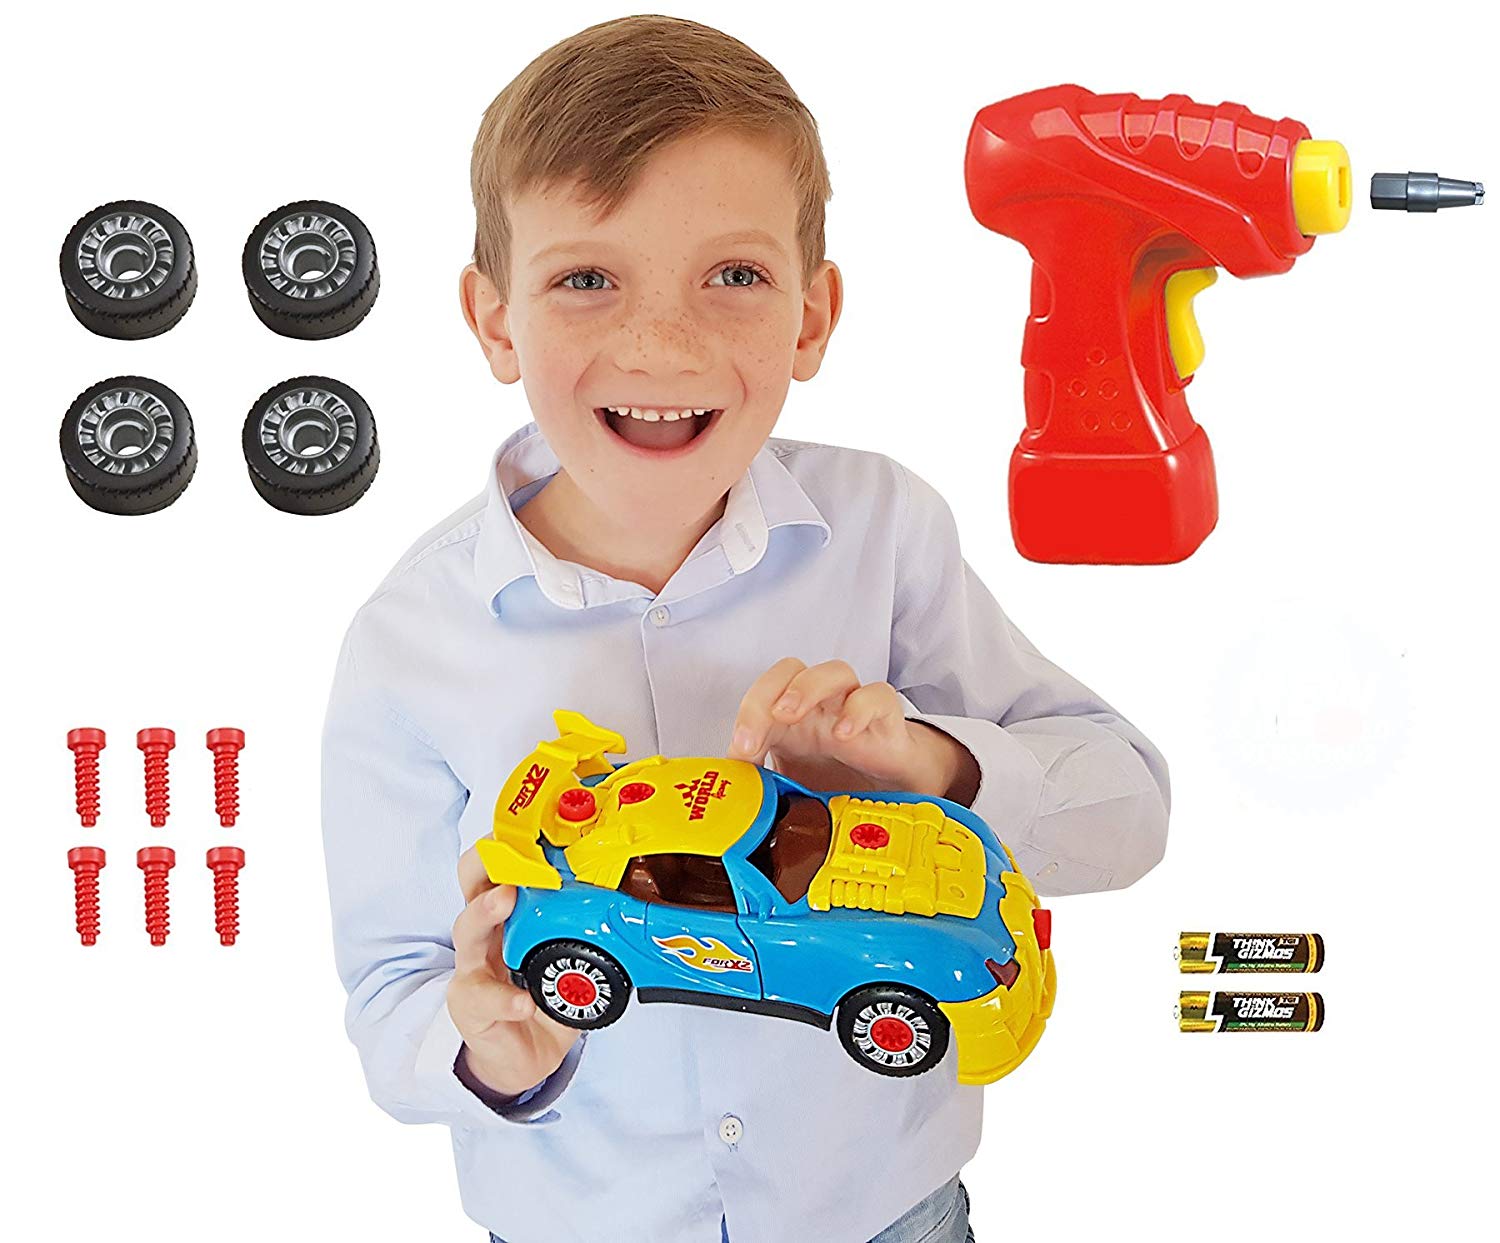 Review of Think Gizmos Take Apart Toy Racing Car - Construction Toy Kit for Boys and Girls Aged 3 4 5 6 7 8